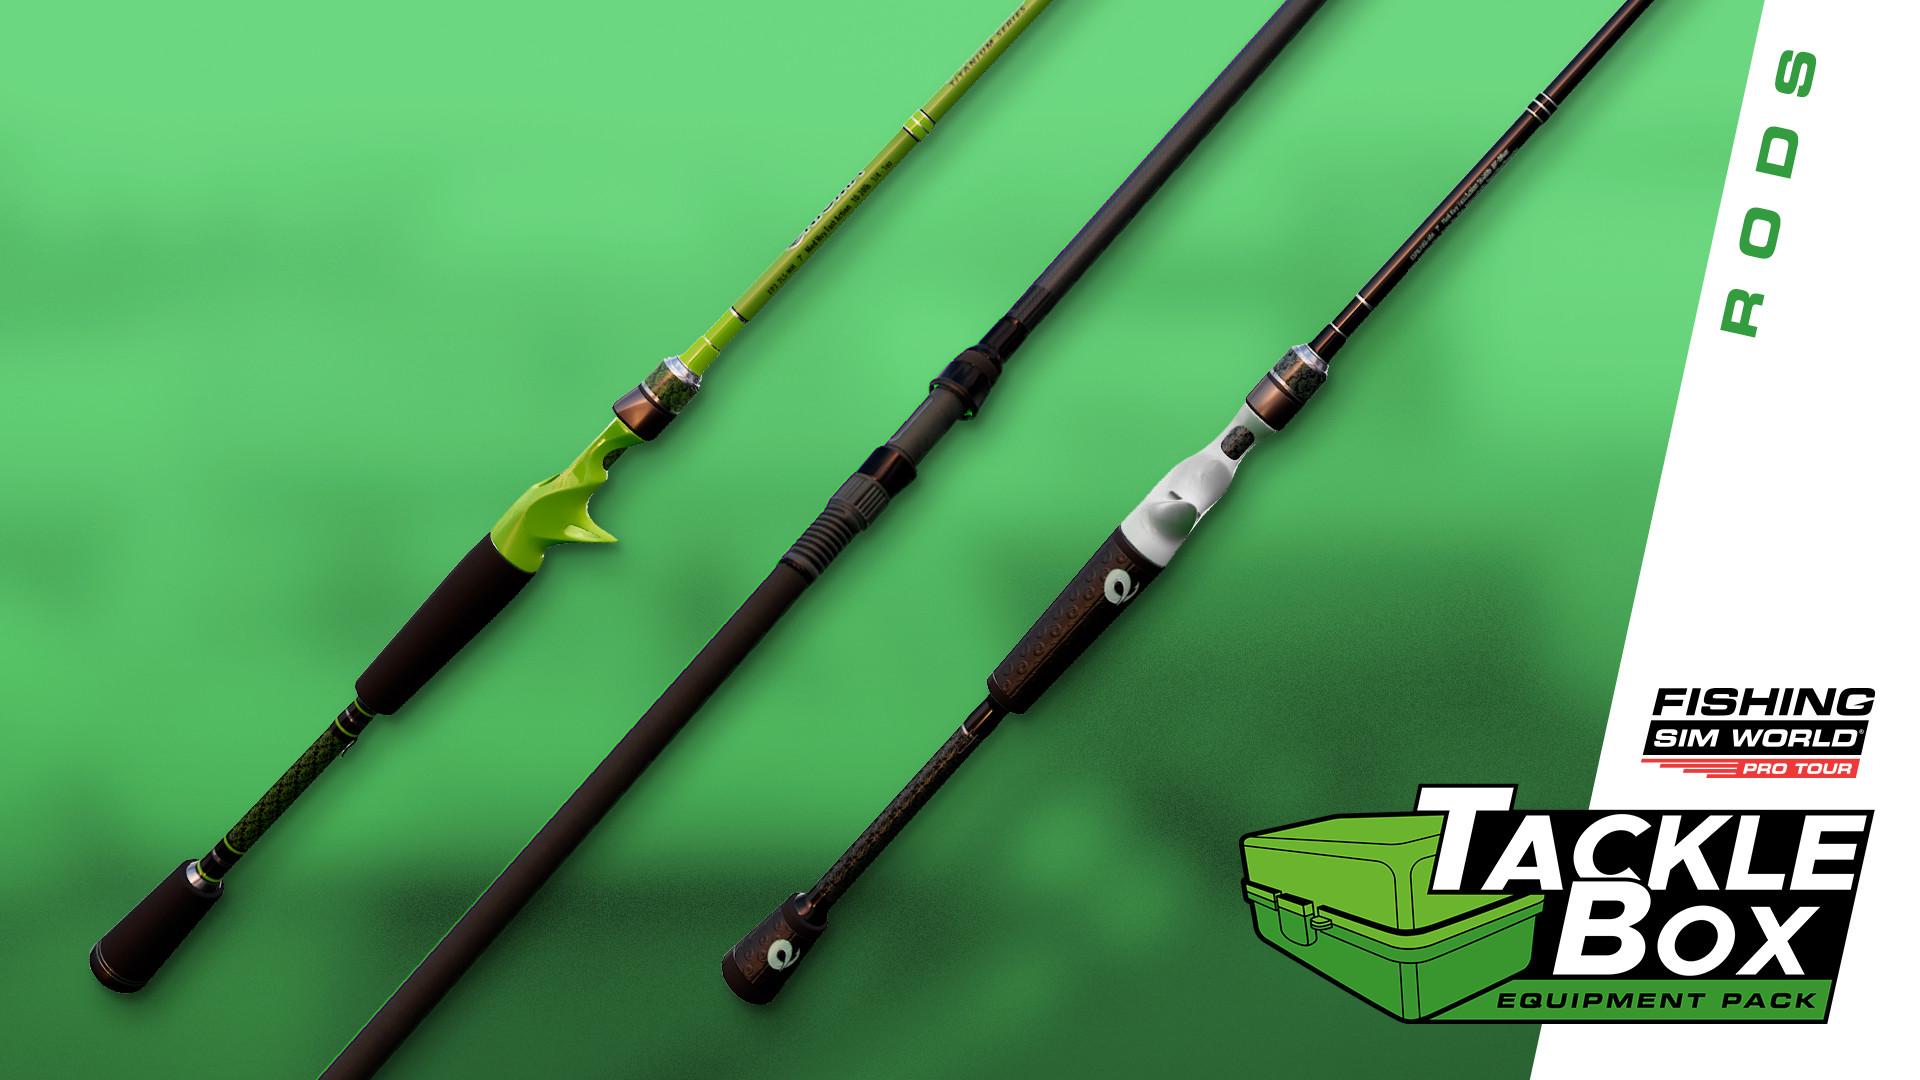 Fishing Sim World®: Pro Tour - Tackle Box Equipment Pack on Steam